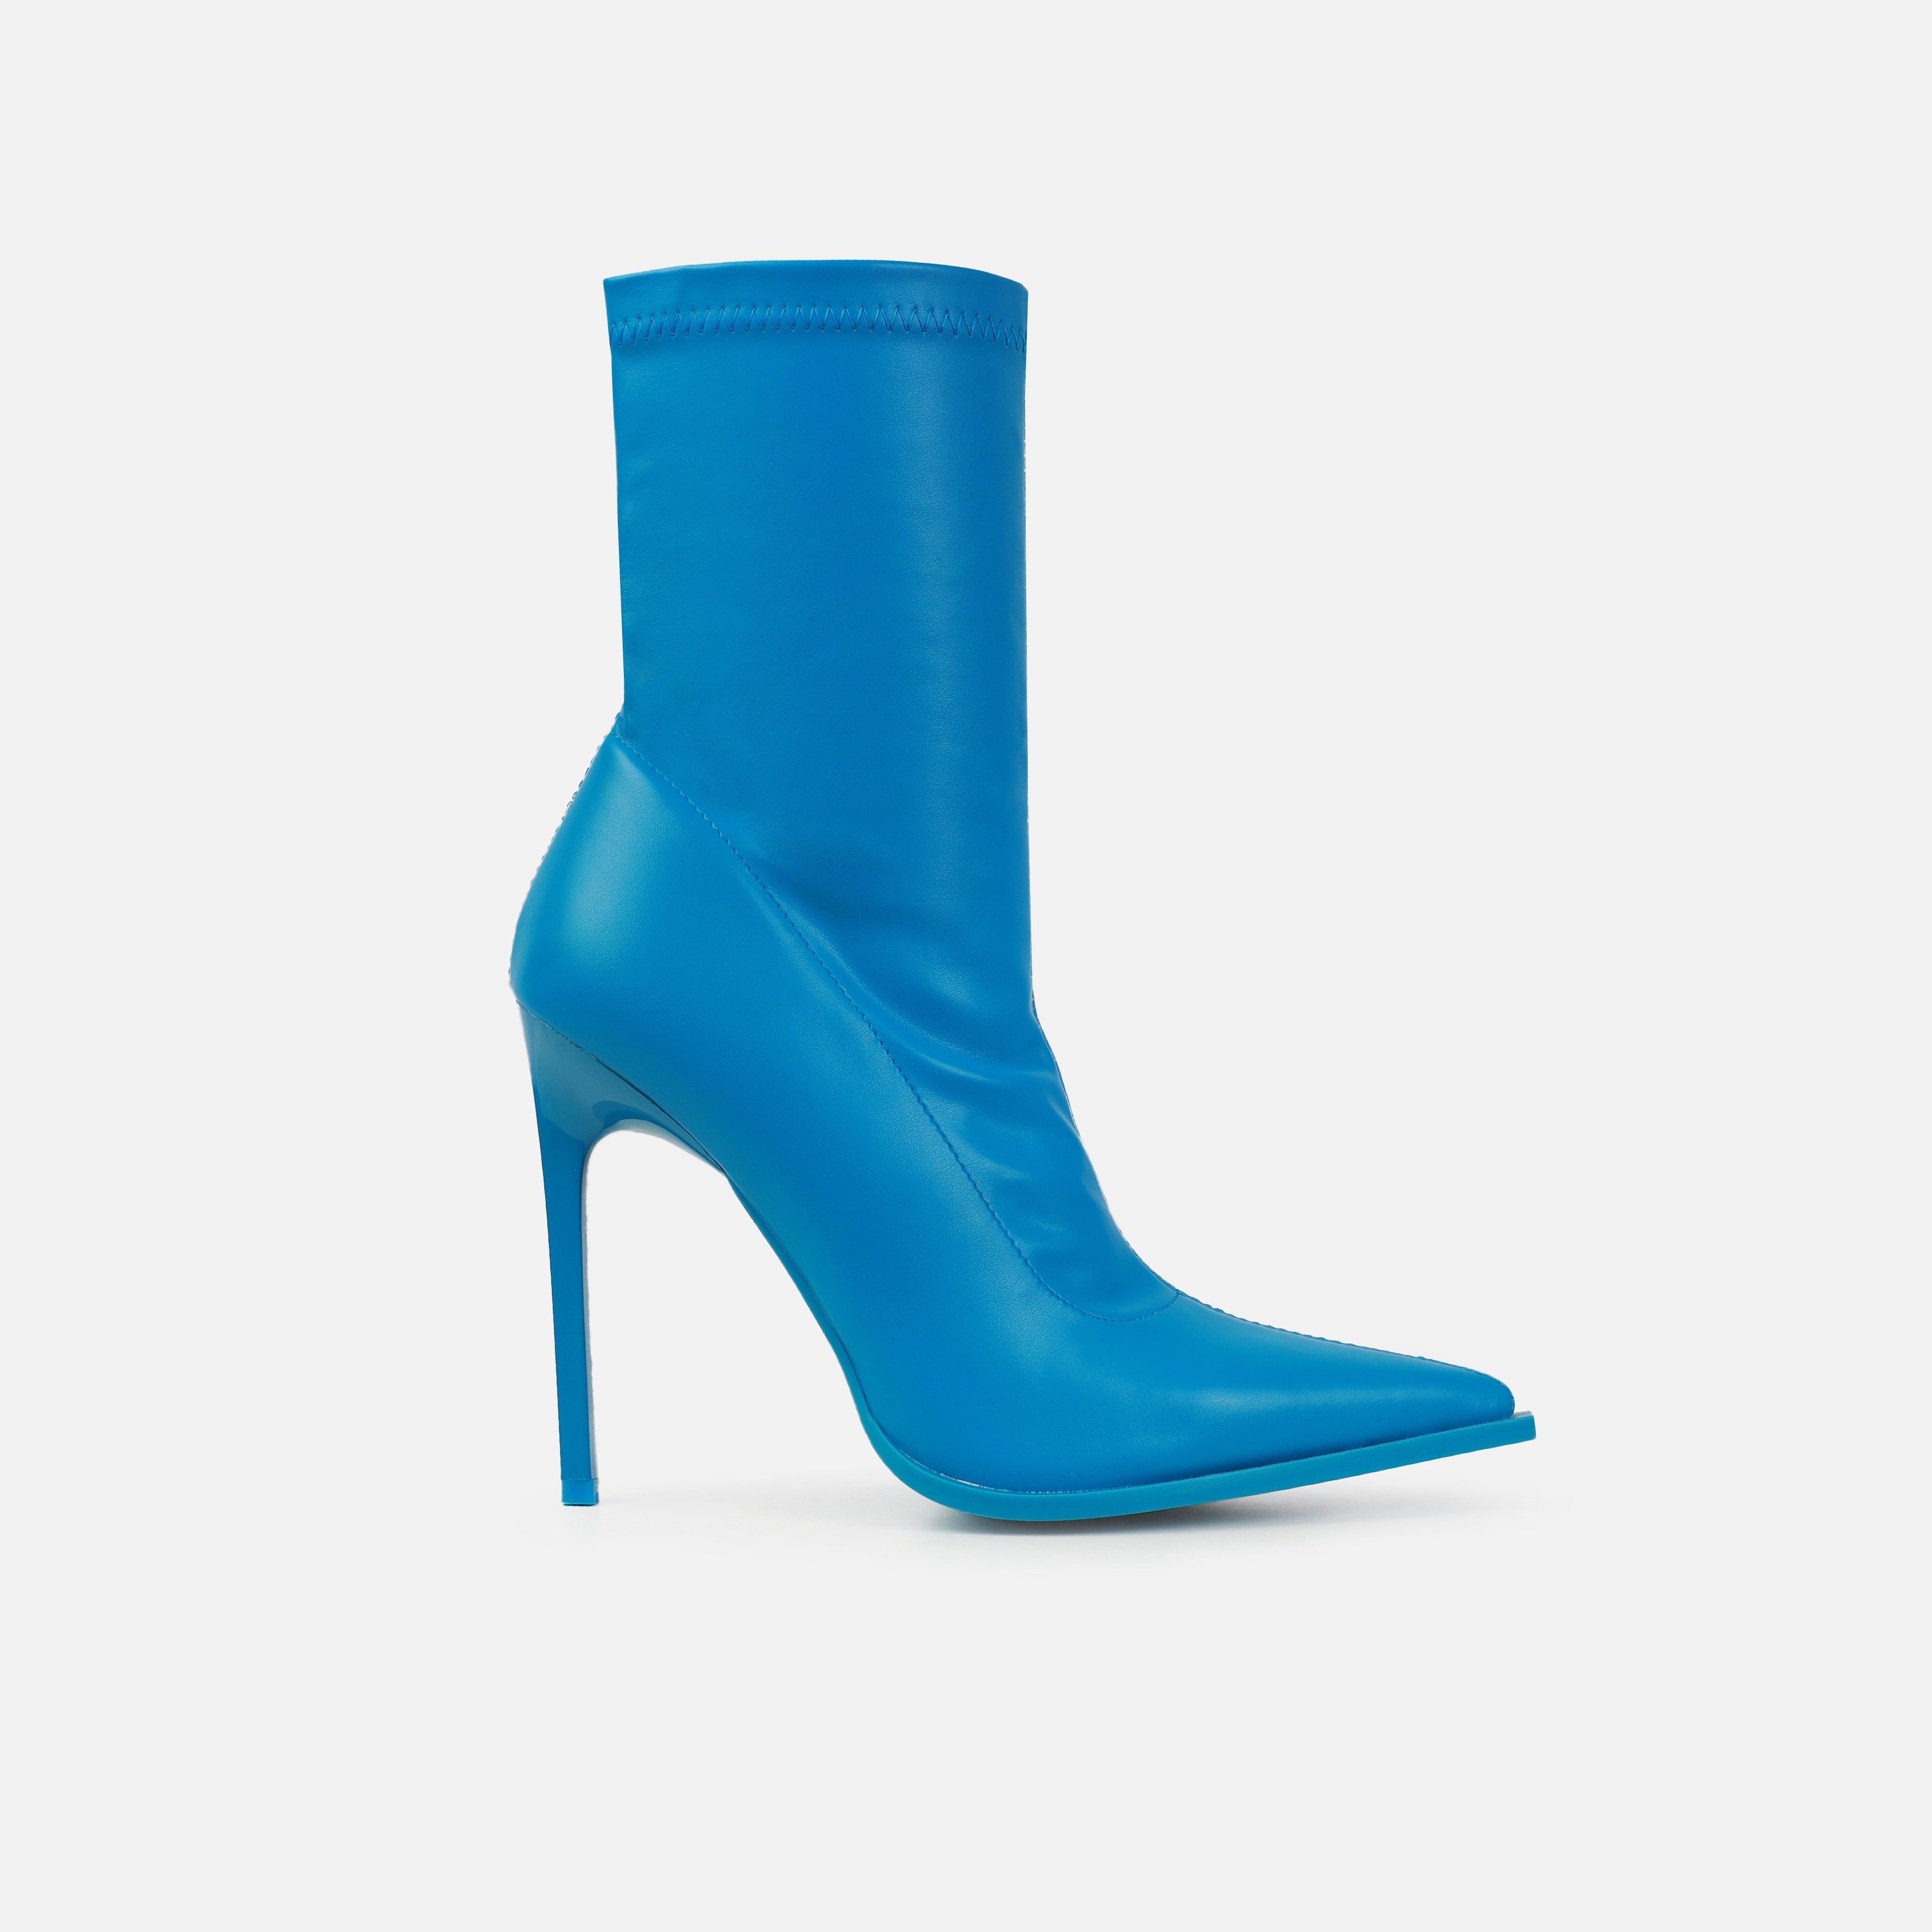 Bia Blue Pointed Toe Stiletto Ankle Boots | SIMMI London